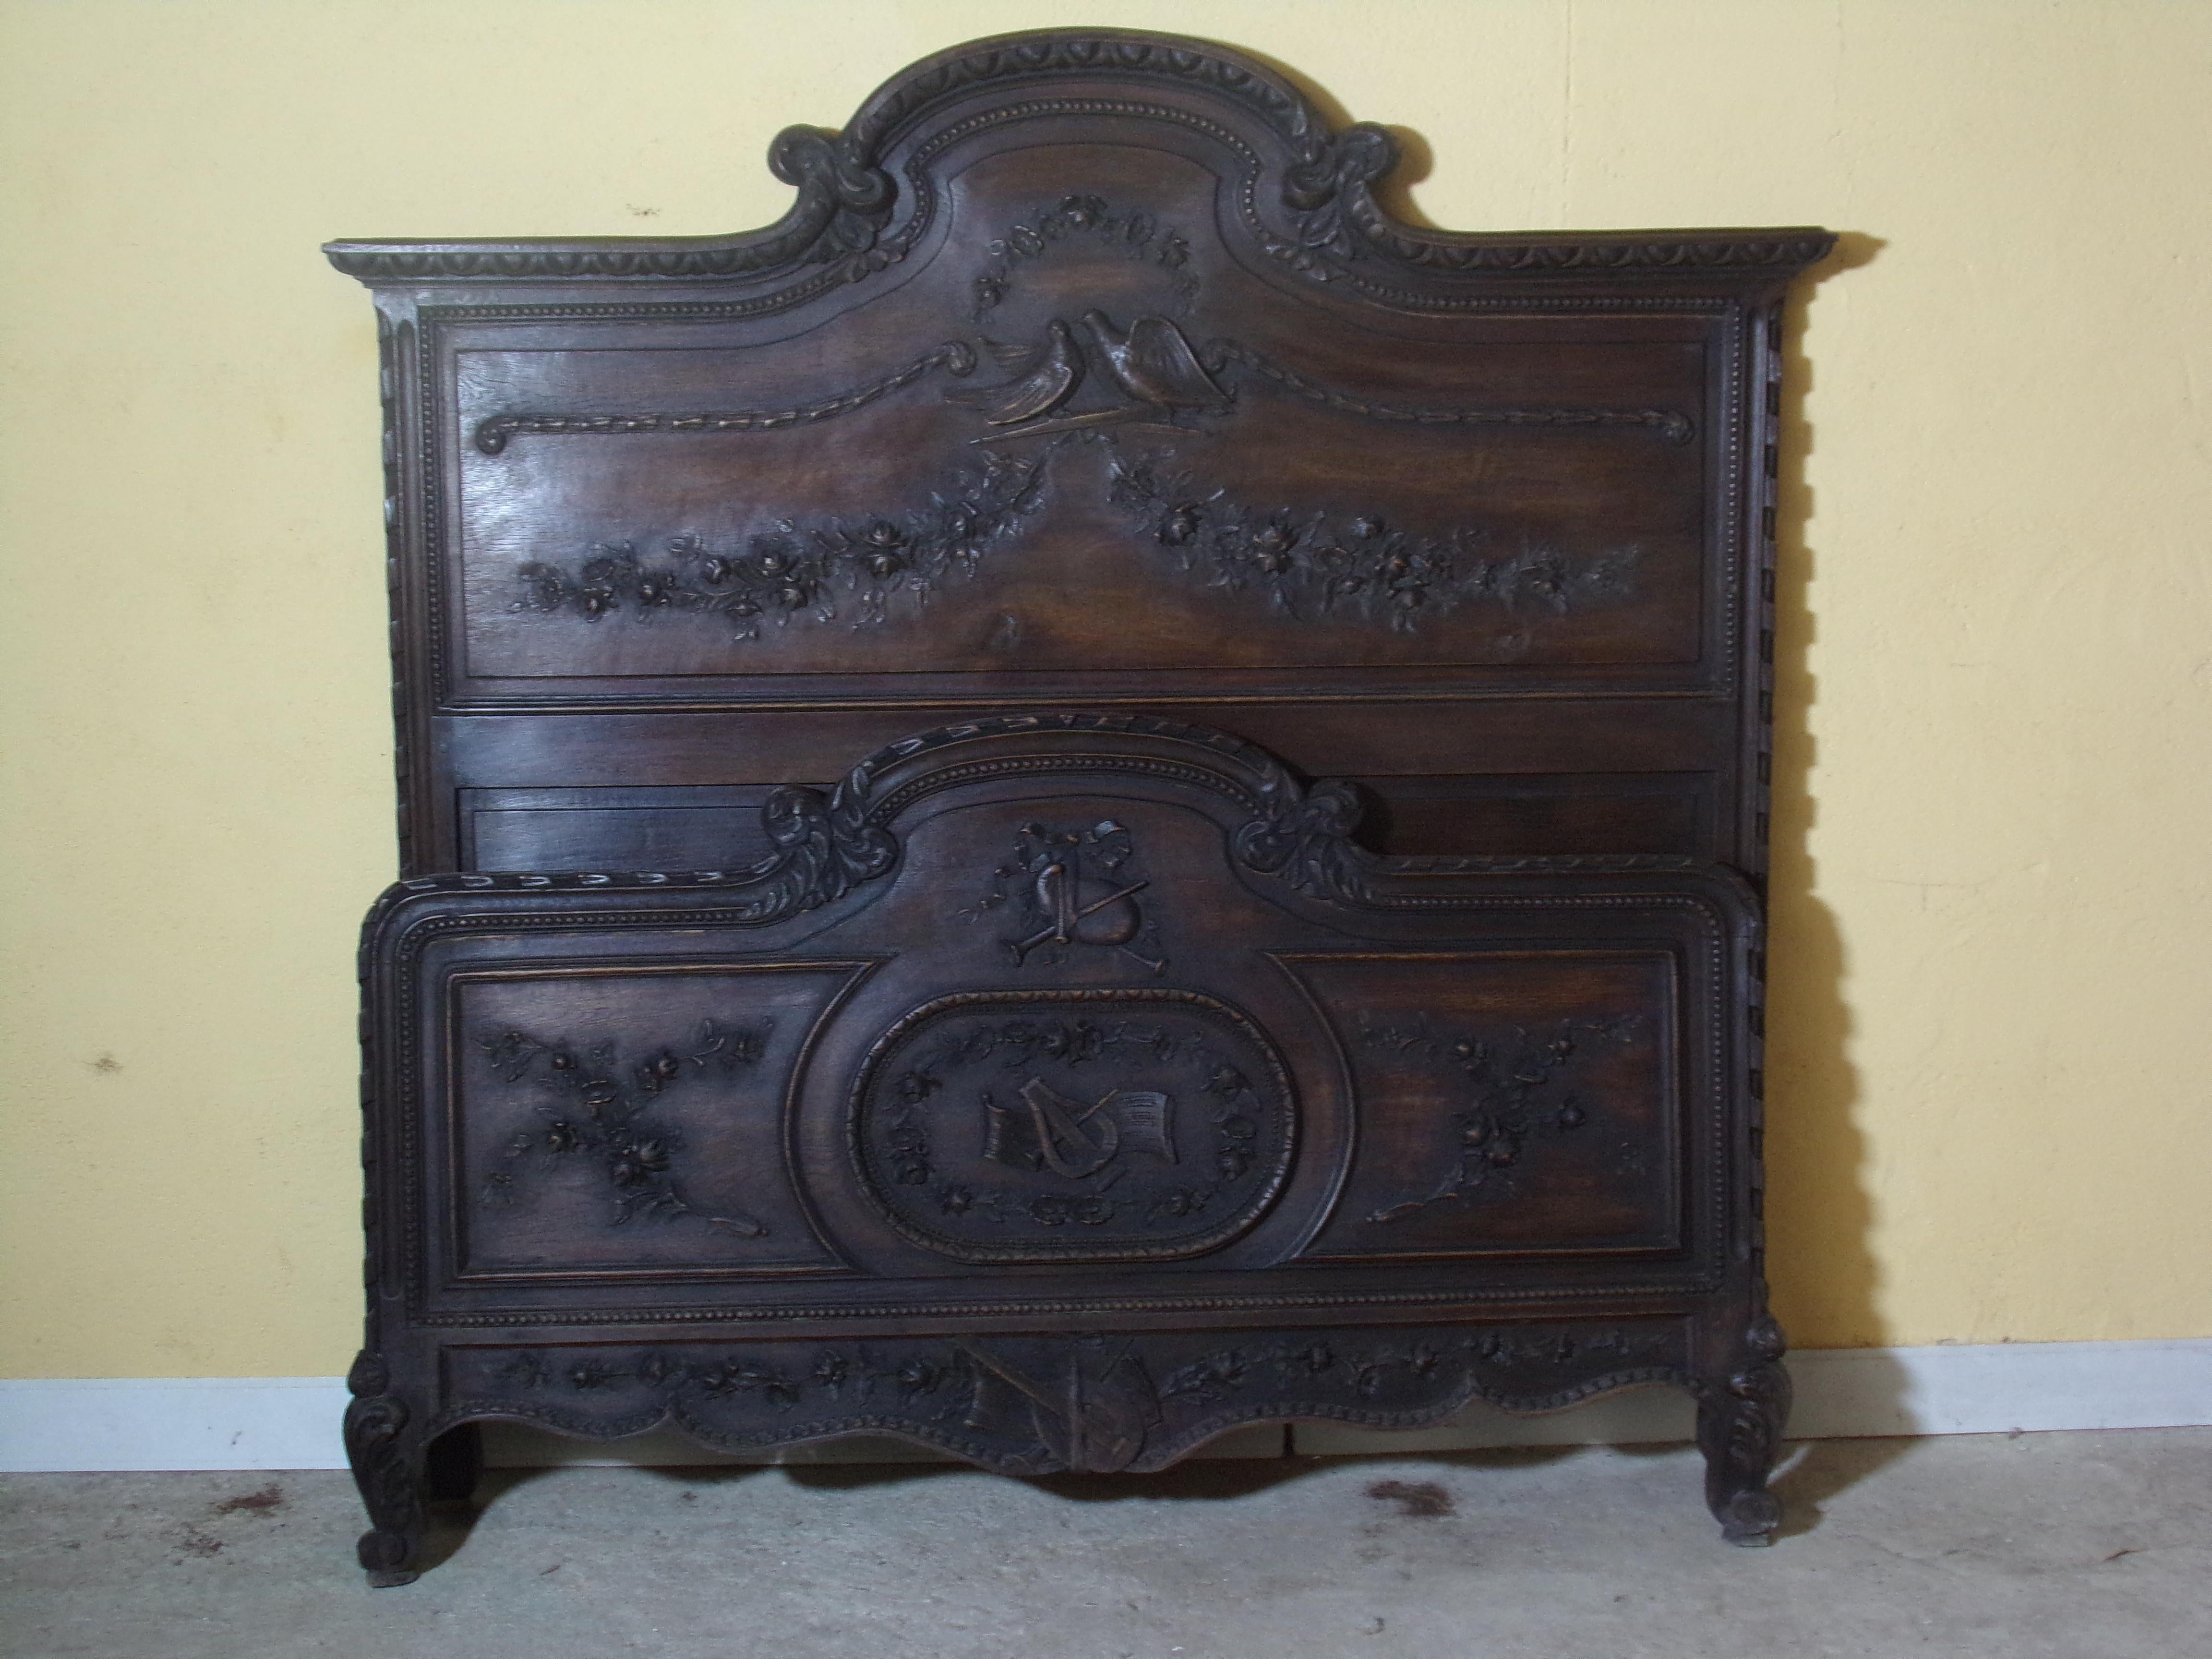 An outstanding and beautifully hand carved marriage bed and bedside cabinet from the Normandy region of France in Oak C1890 - perhaps the best to come to the market in many years. profusely carved with the symbols of marriage, love, happiness and